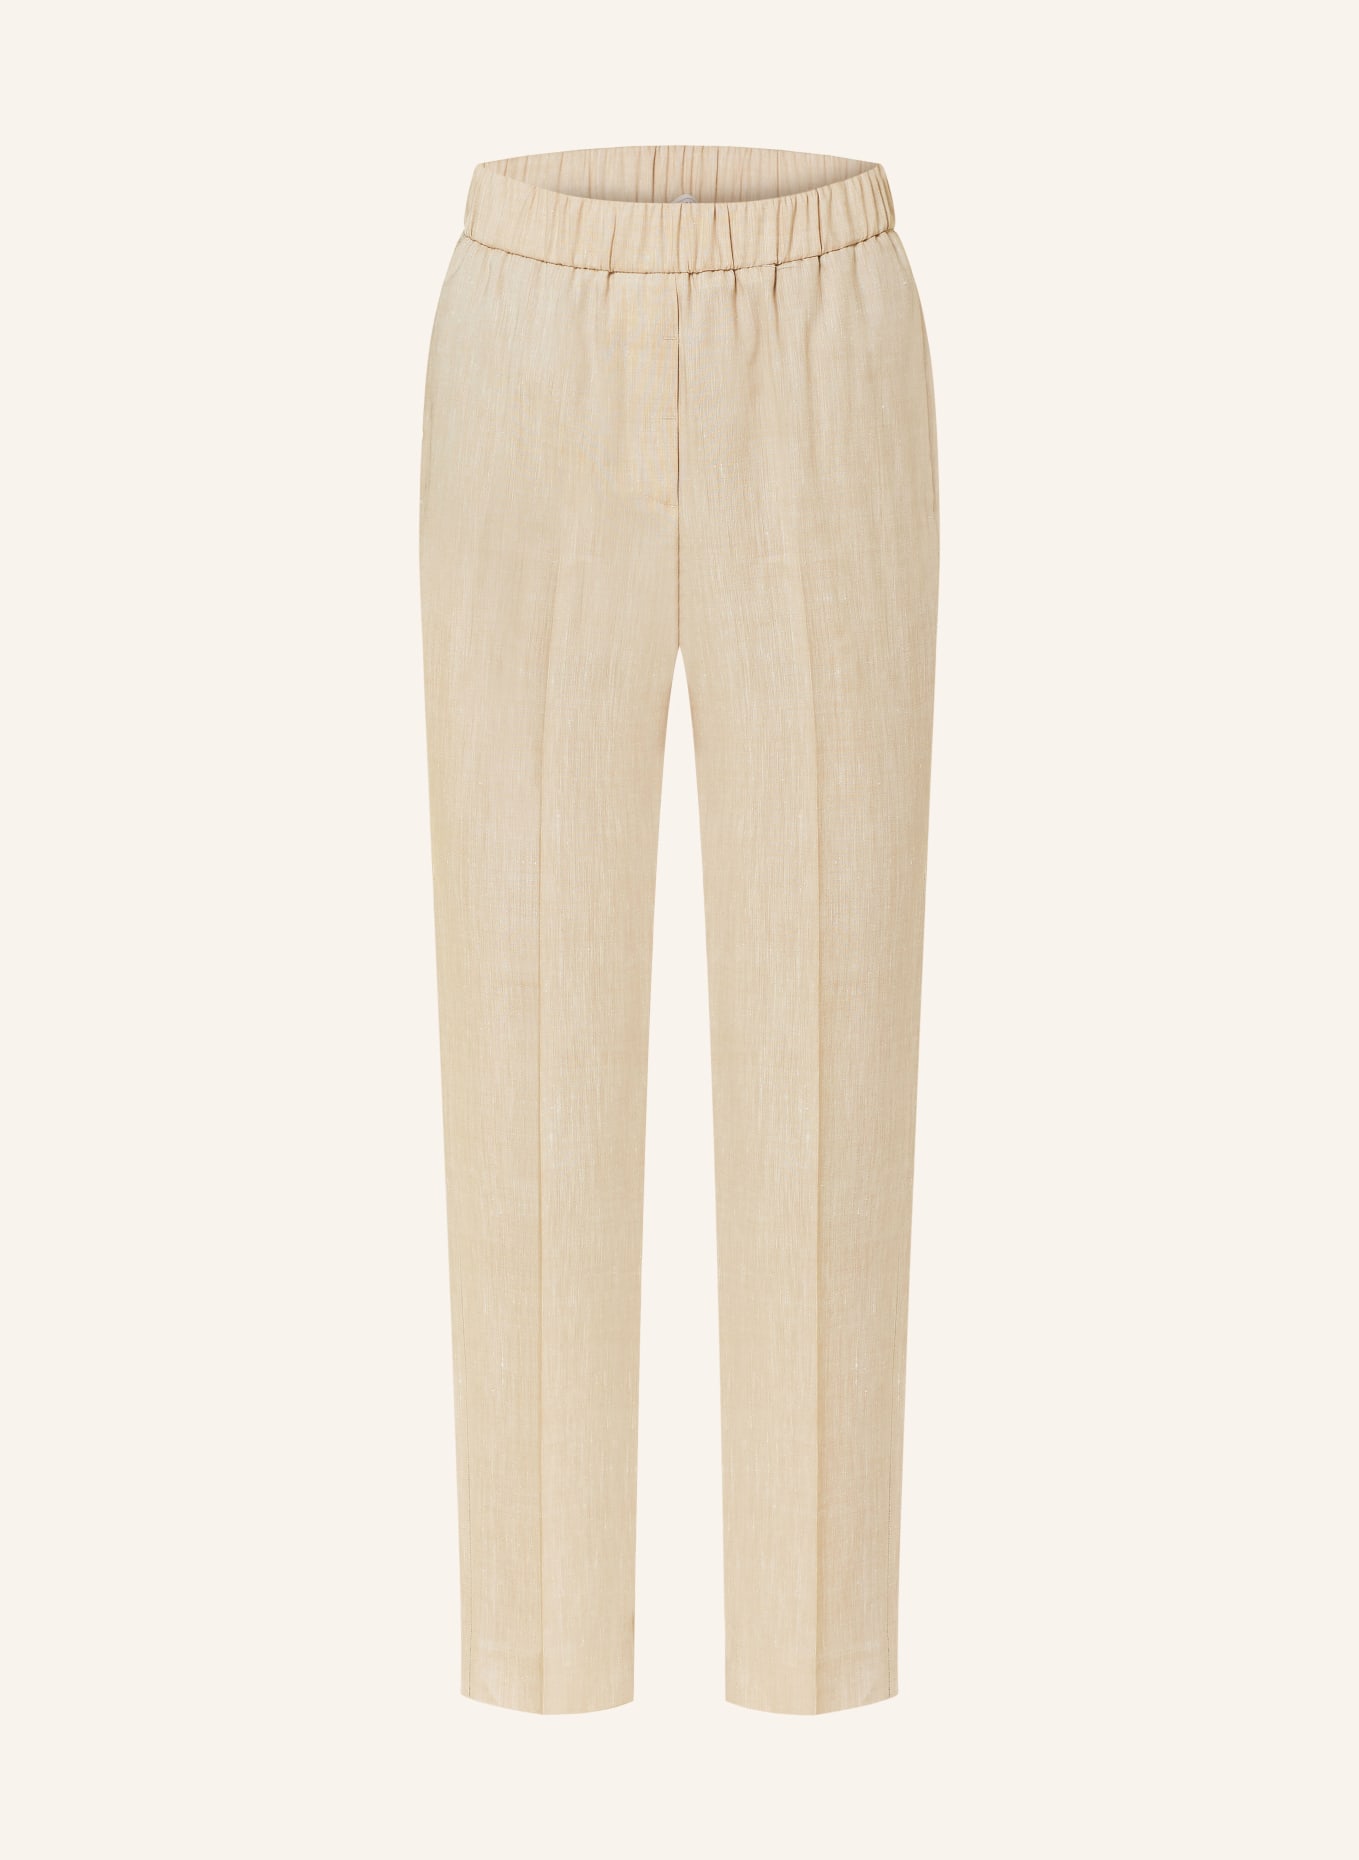 PESERICO 7/8 trousers with linen and decorative beads, Color: BEIGE (Image 1)